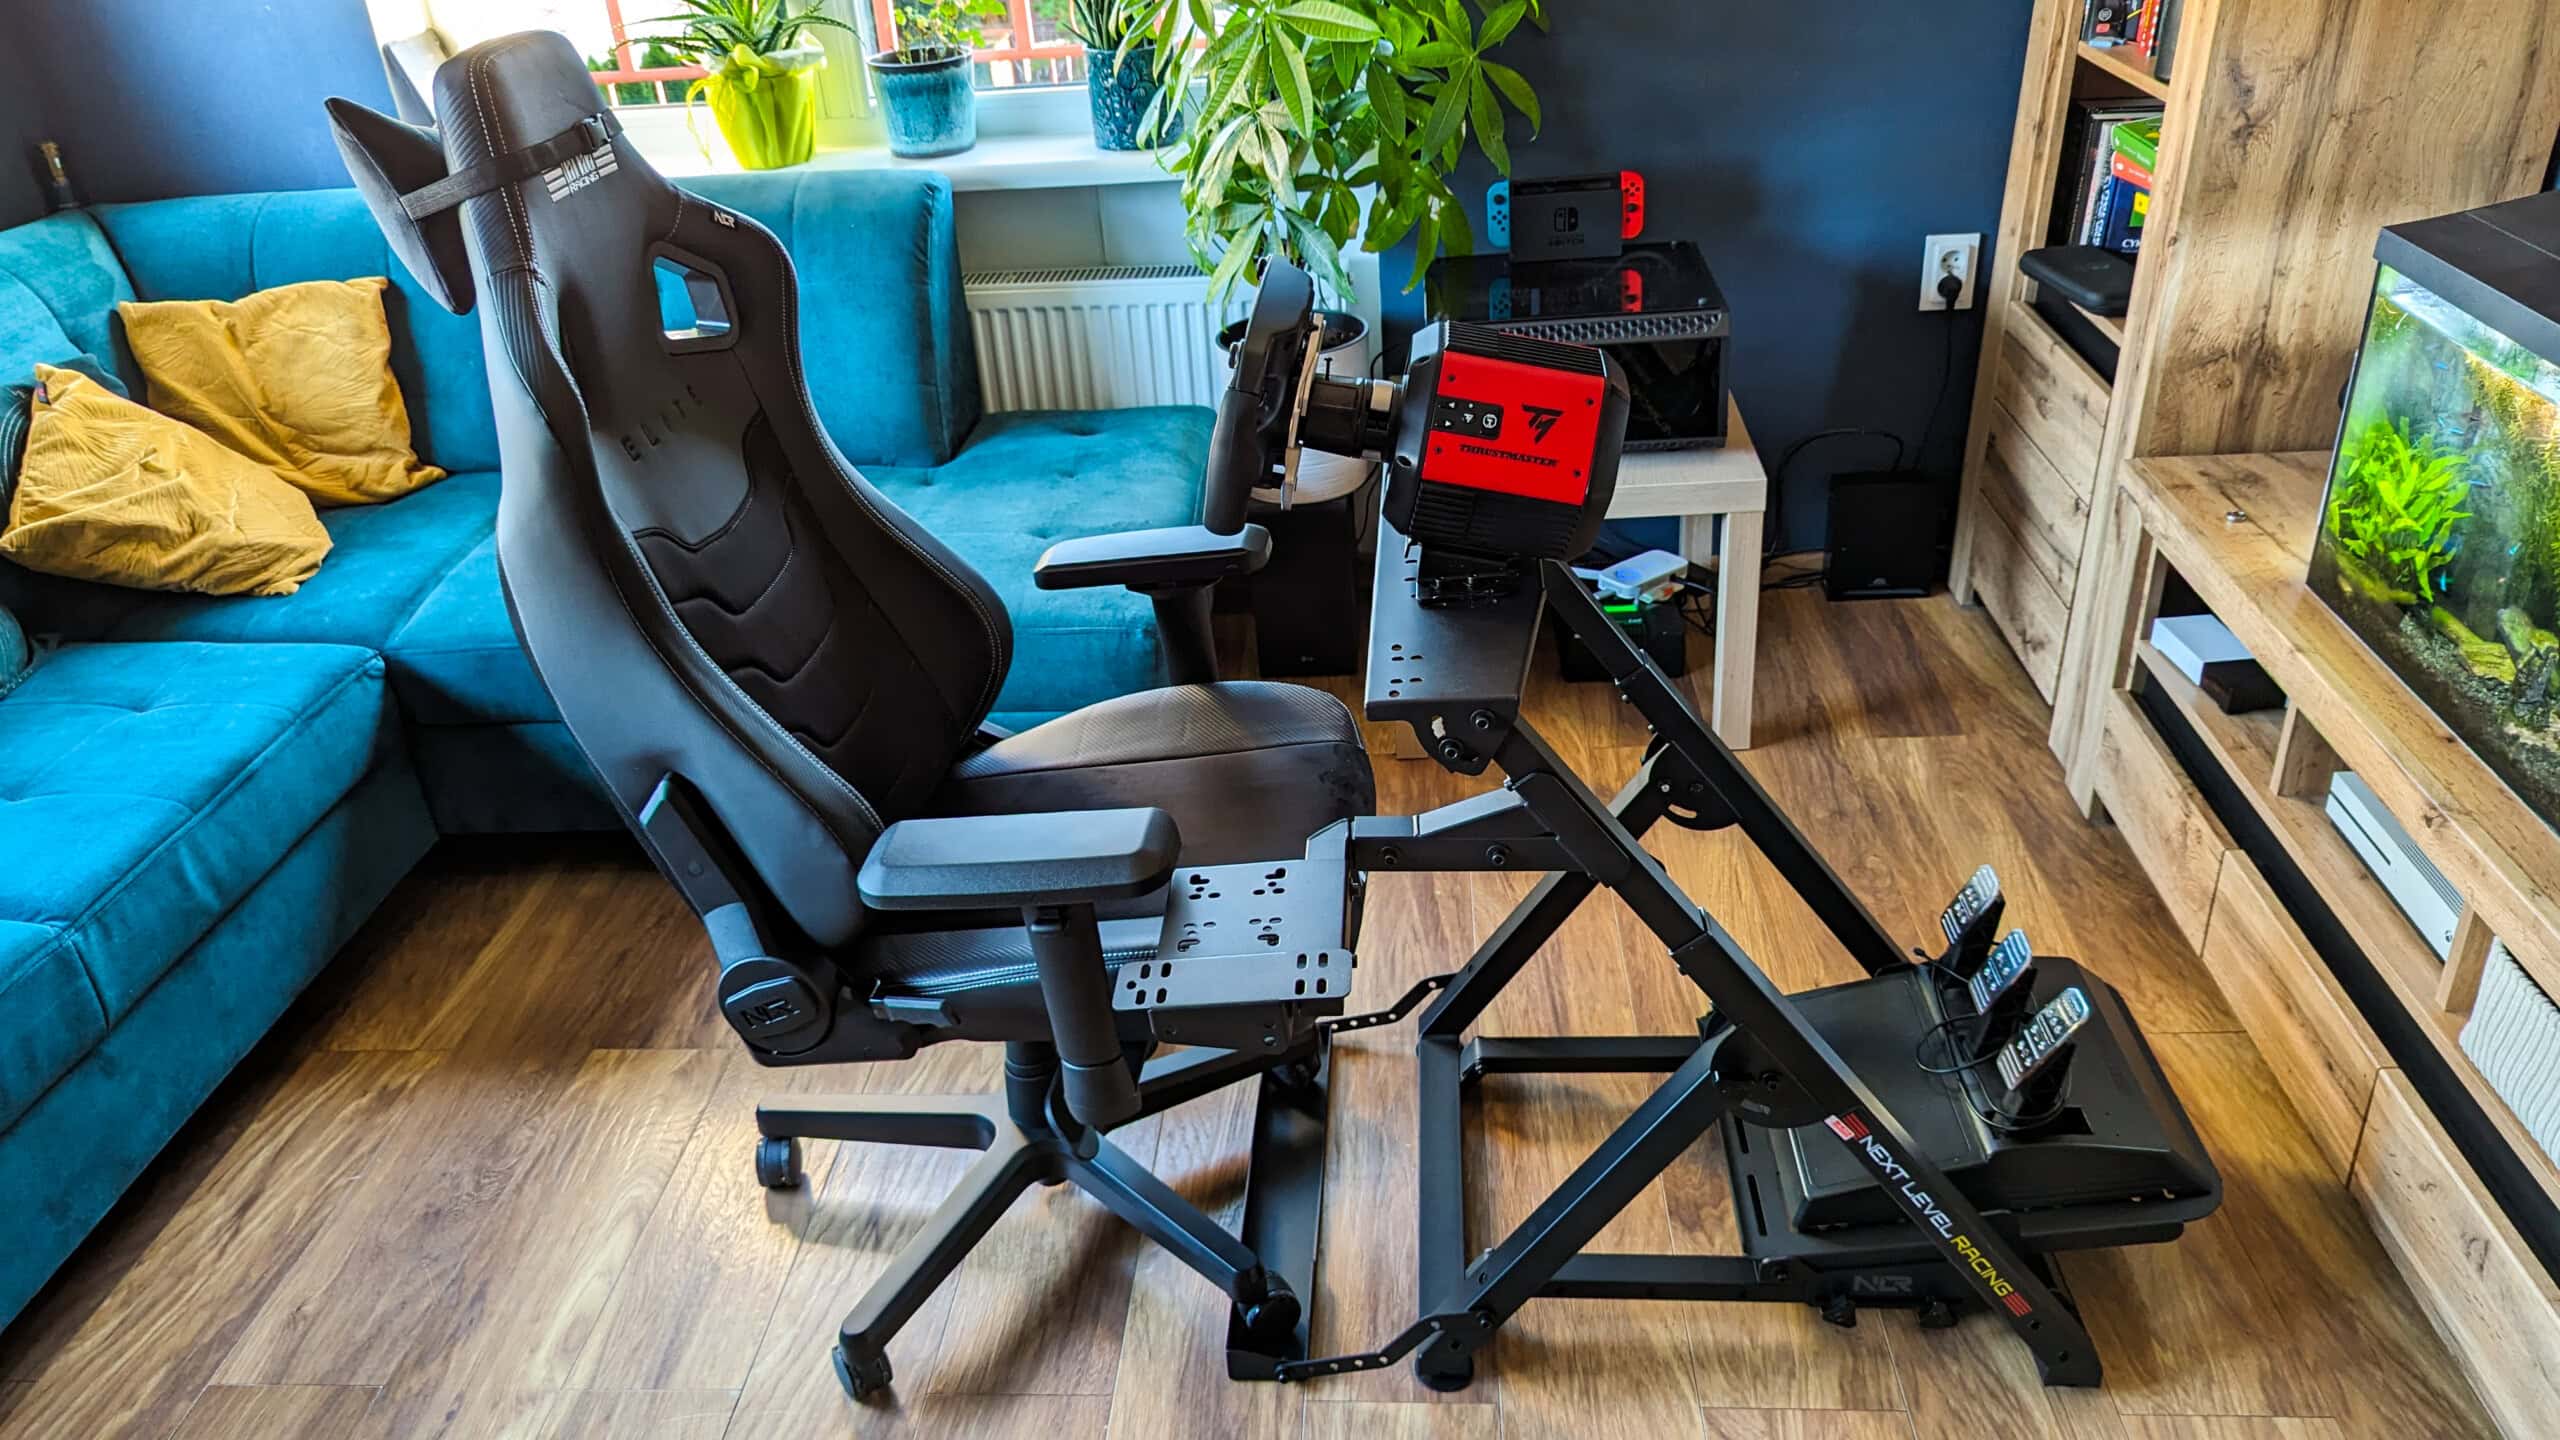 Next Level Racing Wheel Stand 2.0, Next Level Racing Elite Gaming Chair, Thrustmaster T818